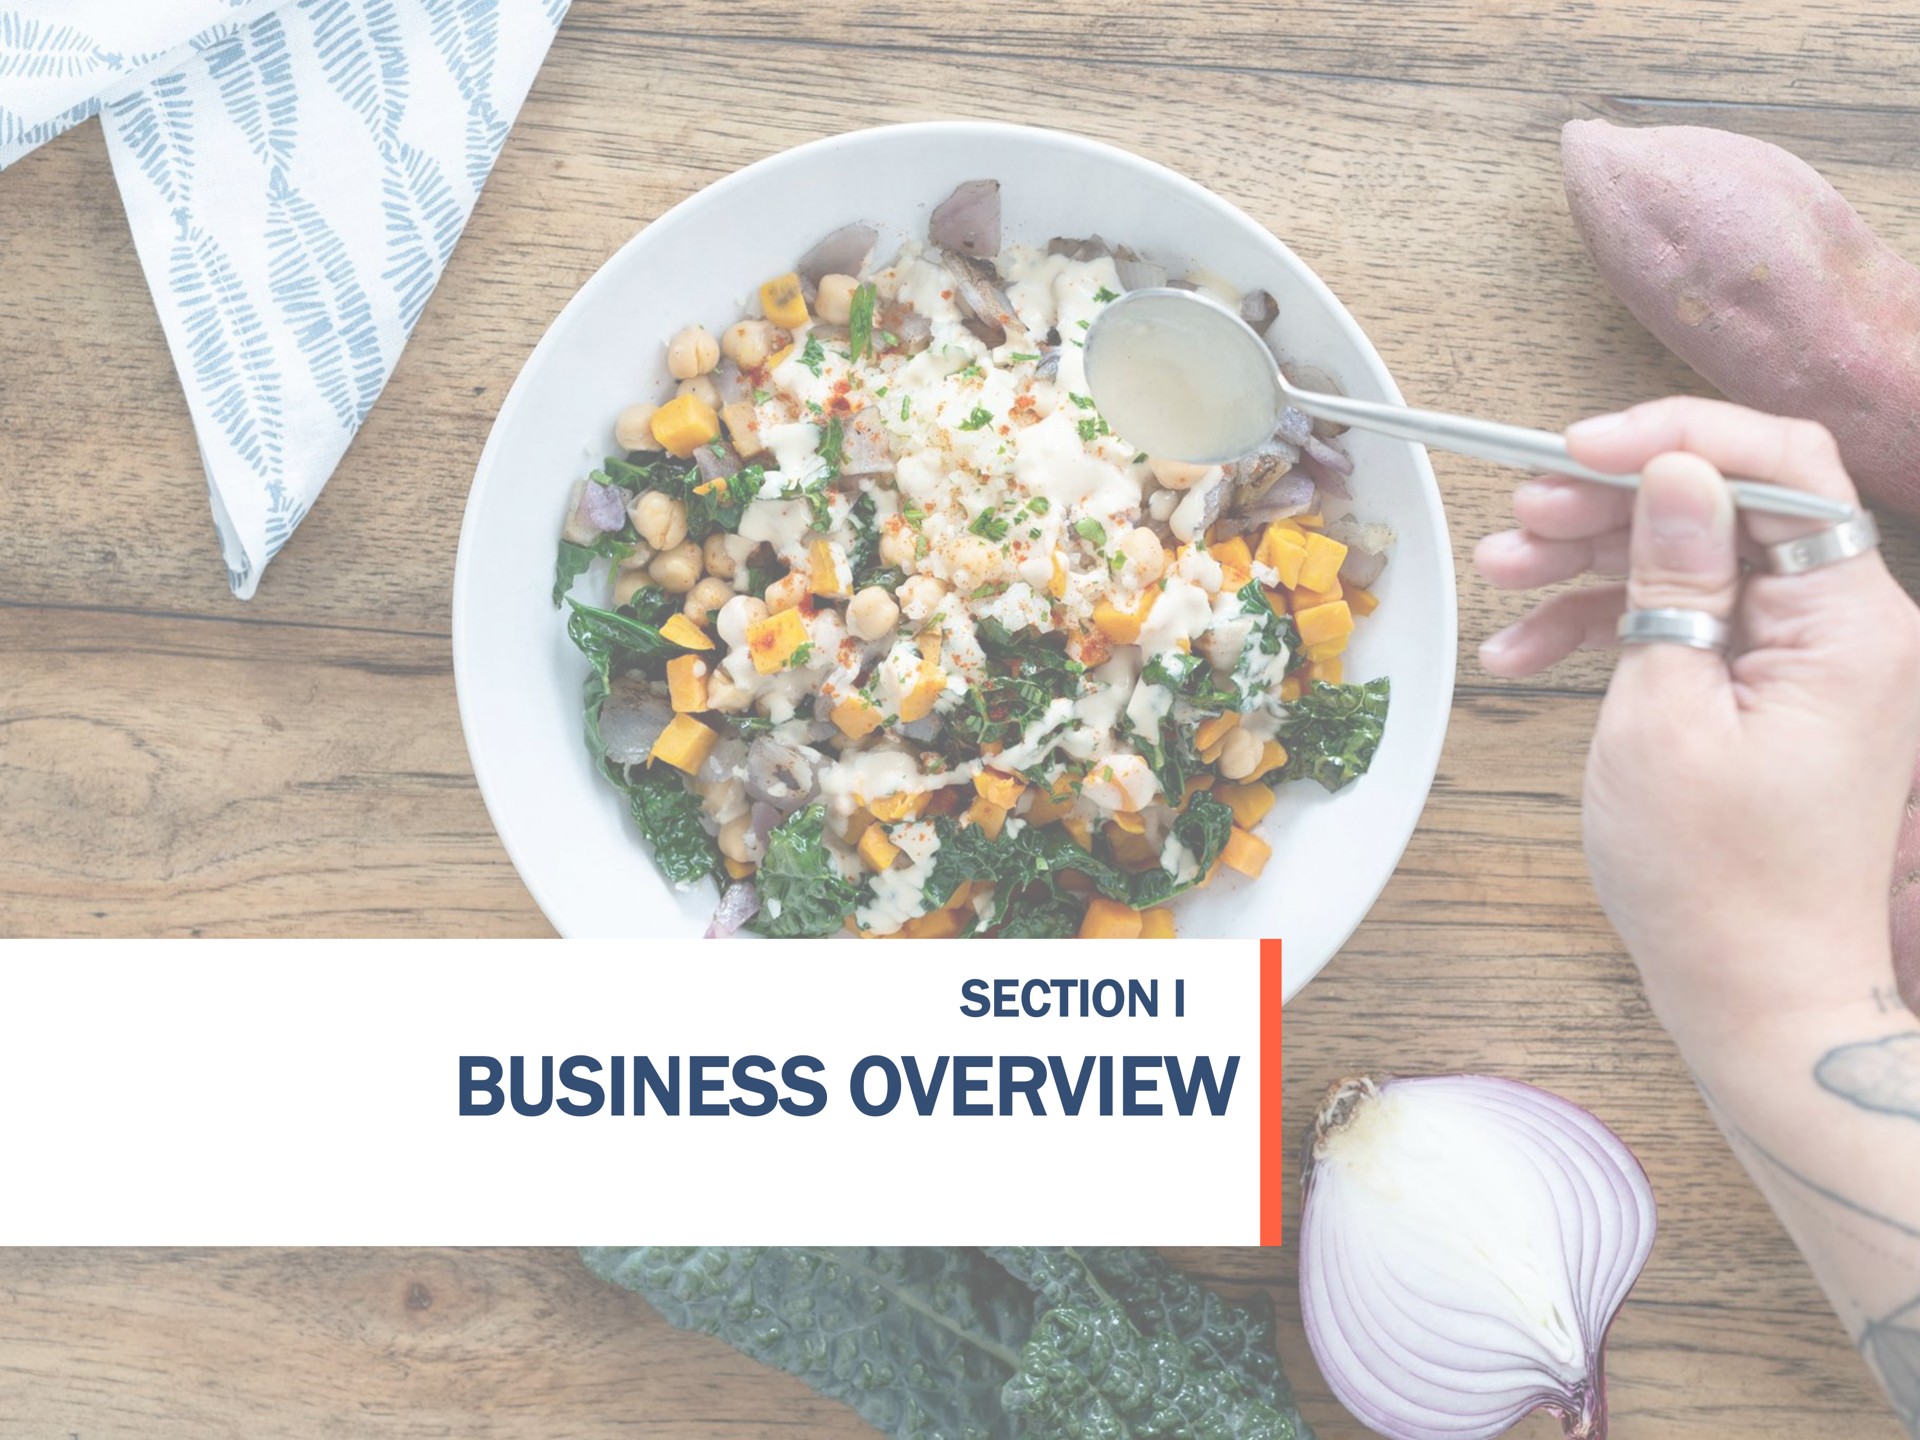 section i business overview | Tattooed Chef